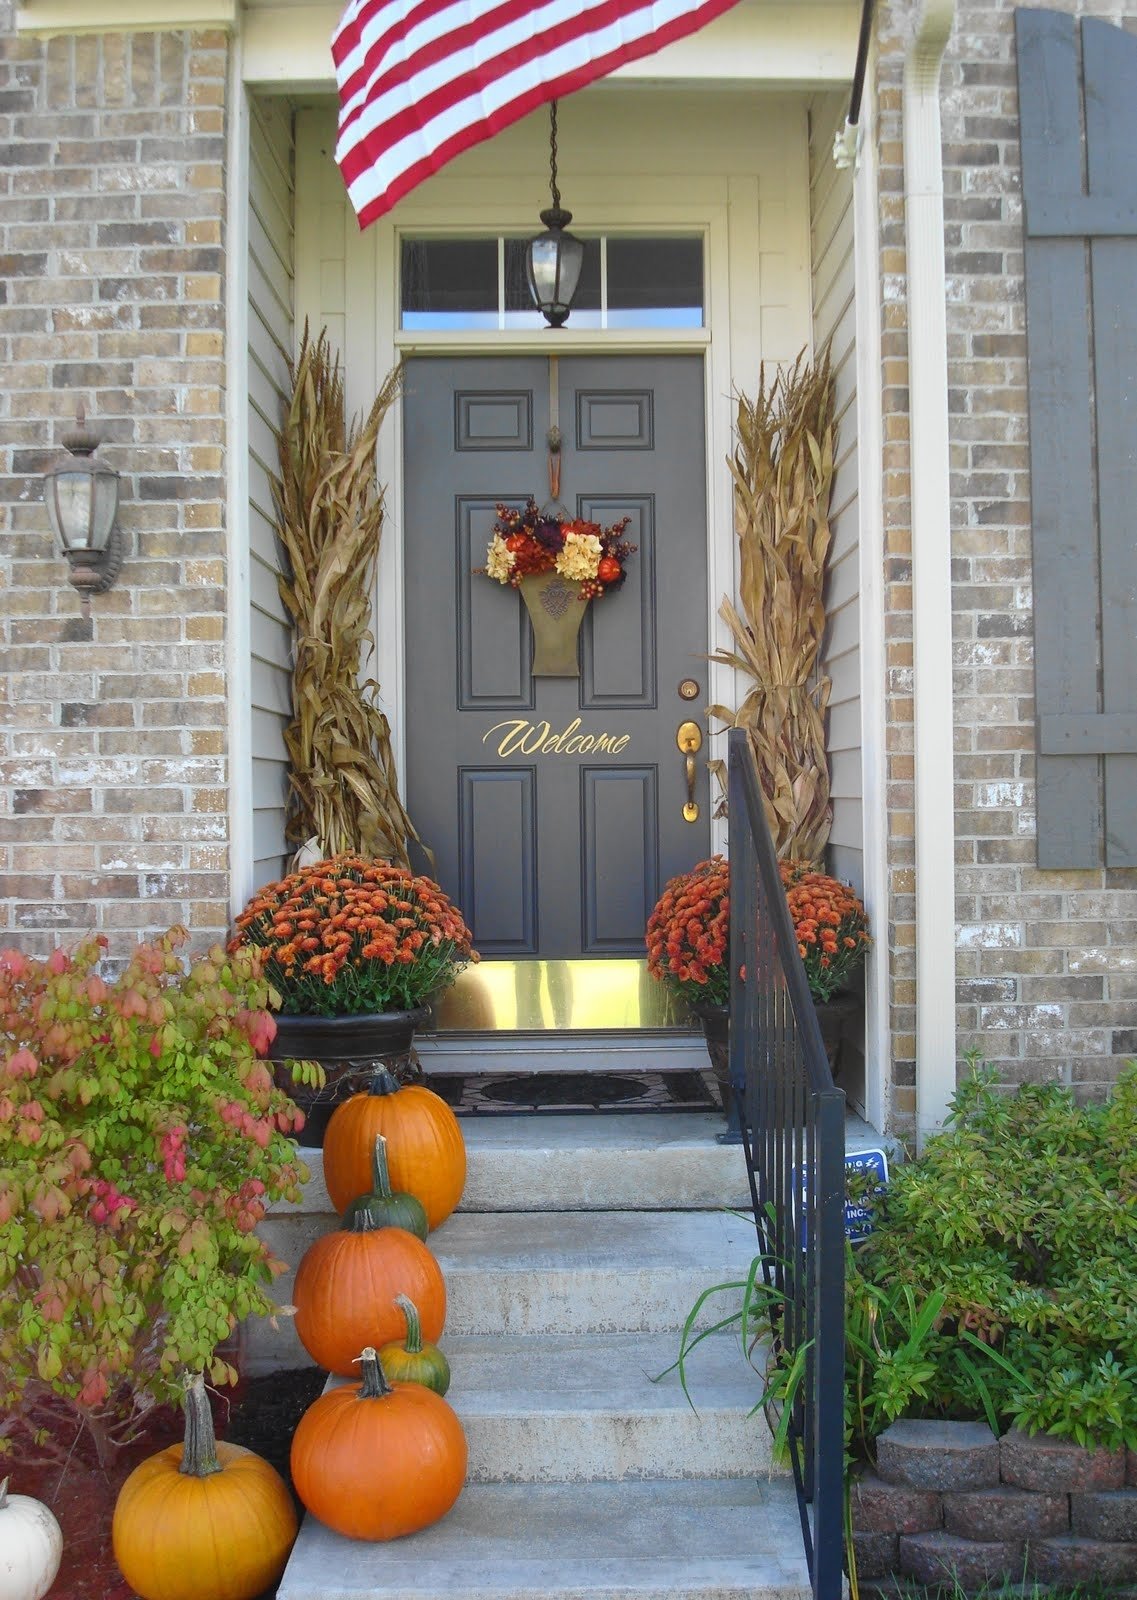 10 Cute Fall Front Porch Decorating Ideas 22 fall front porch ideas veranda home stories a to z fall front 1 2022